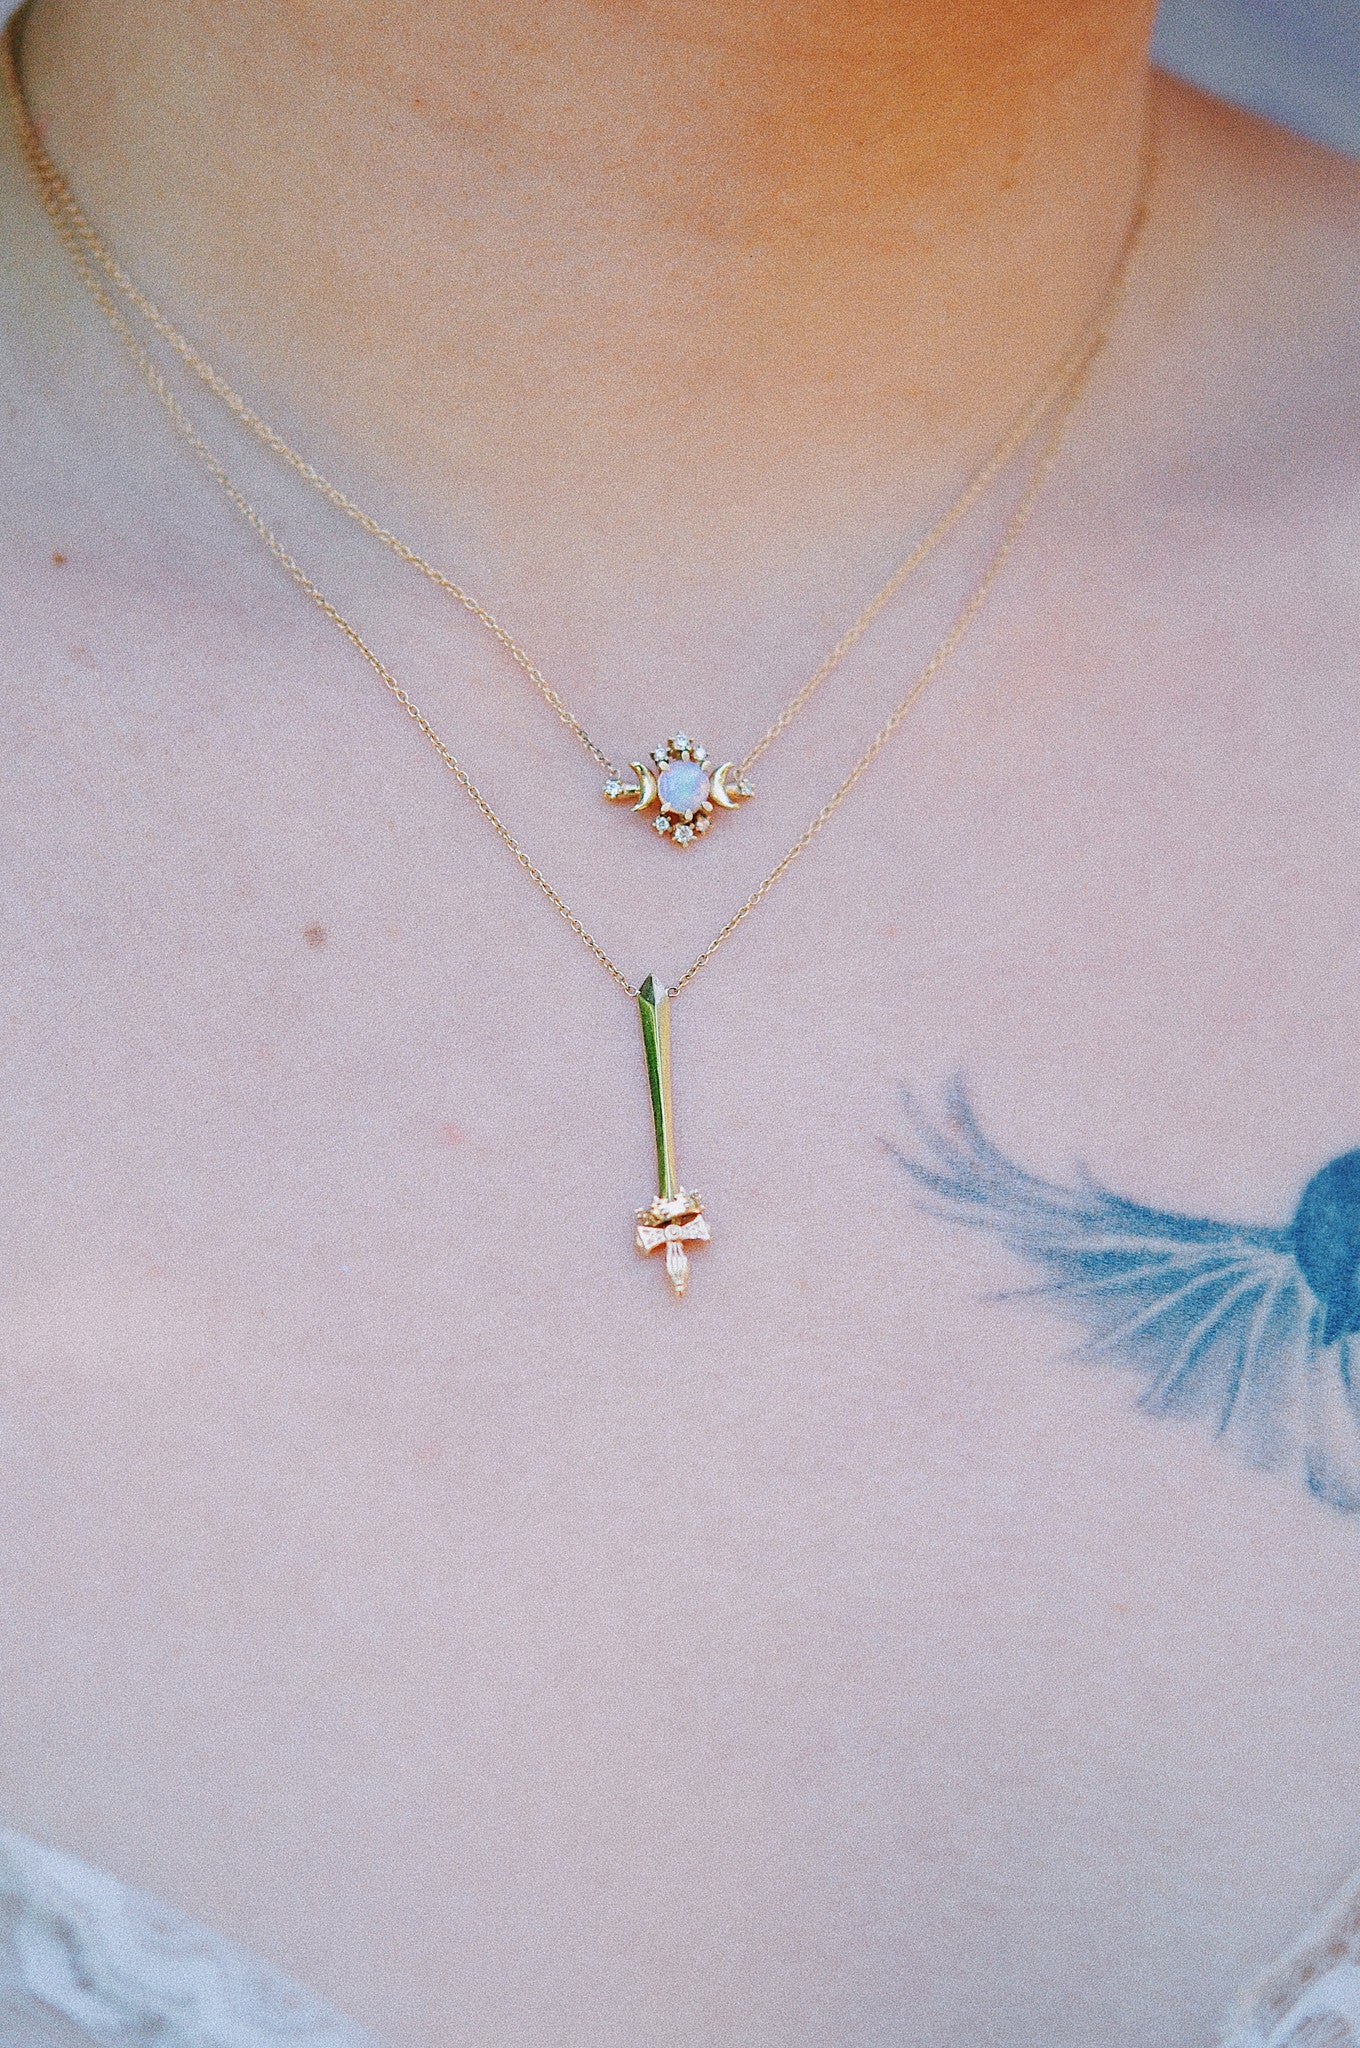 Wandering Star Necklace